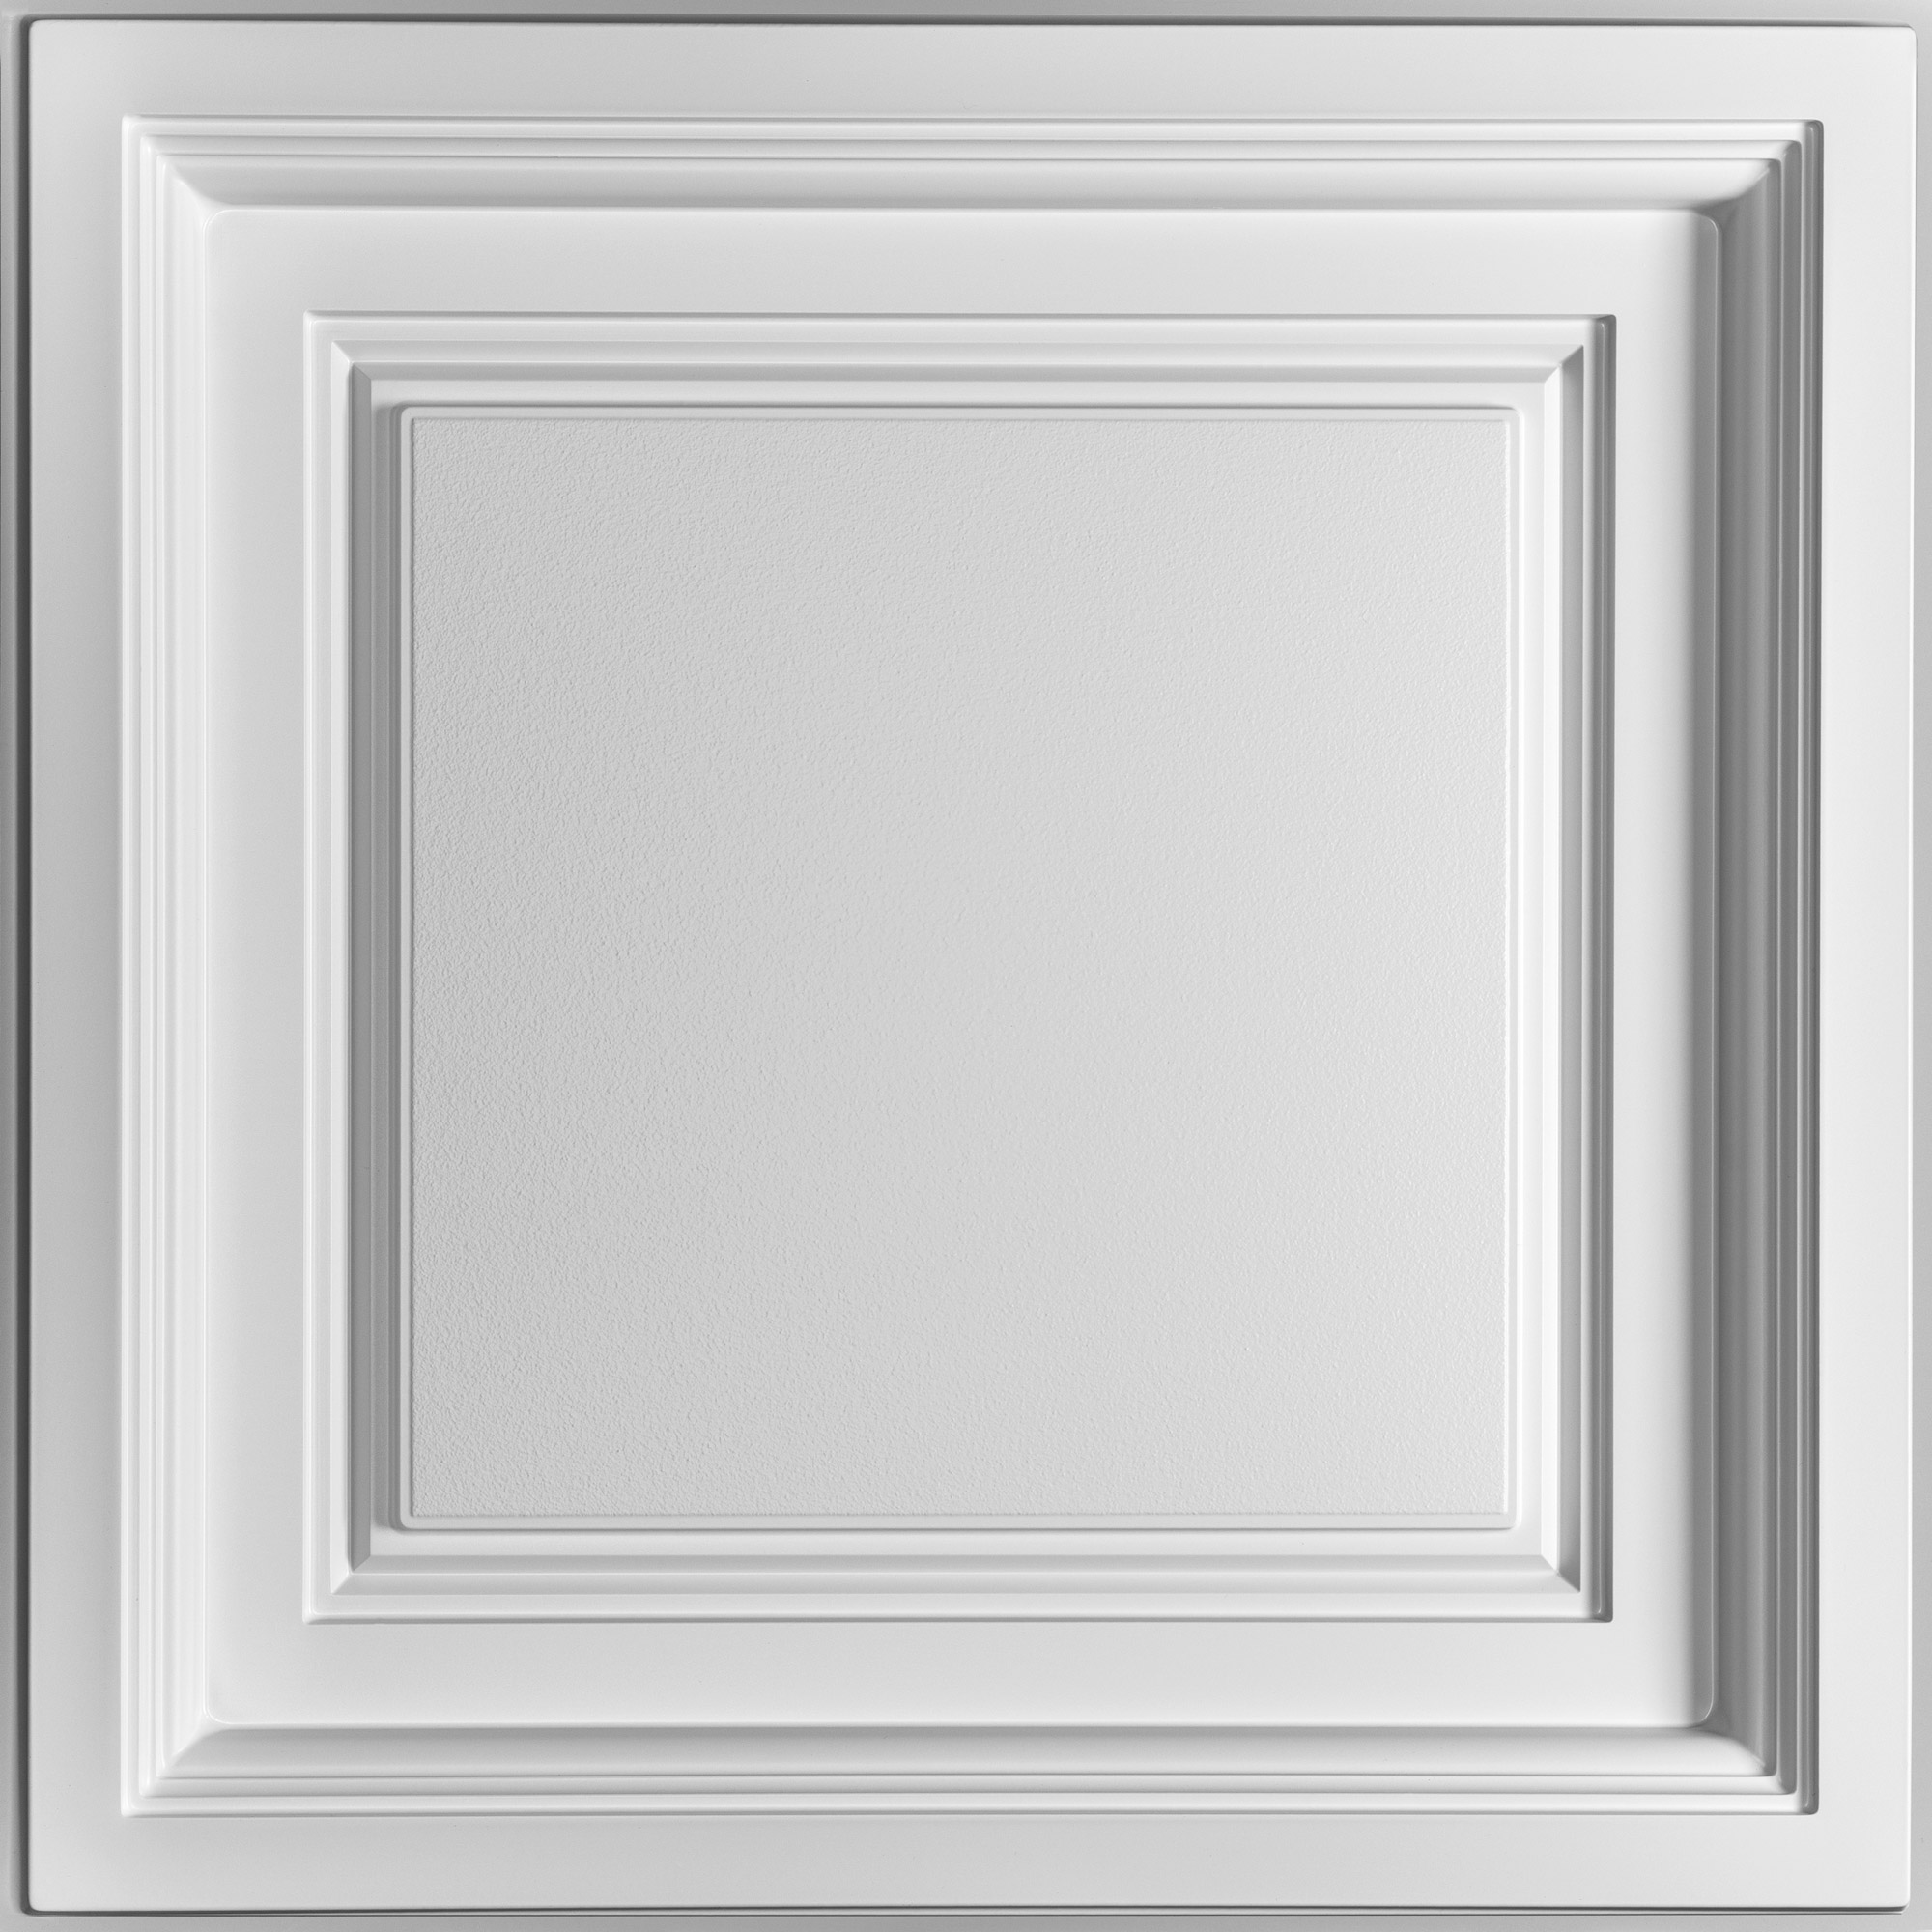 Westminster White Ceiling Tiles, Black Drop Ceiling Tiles Canada